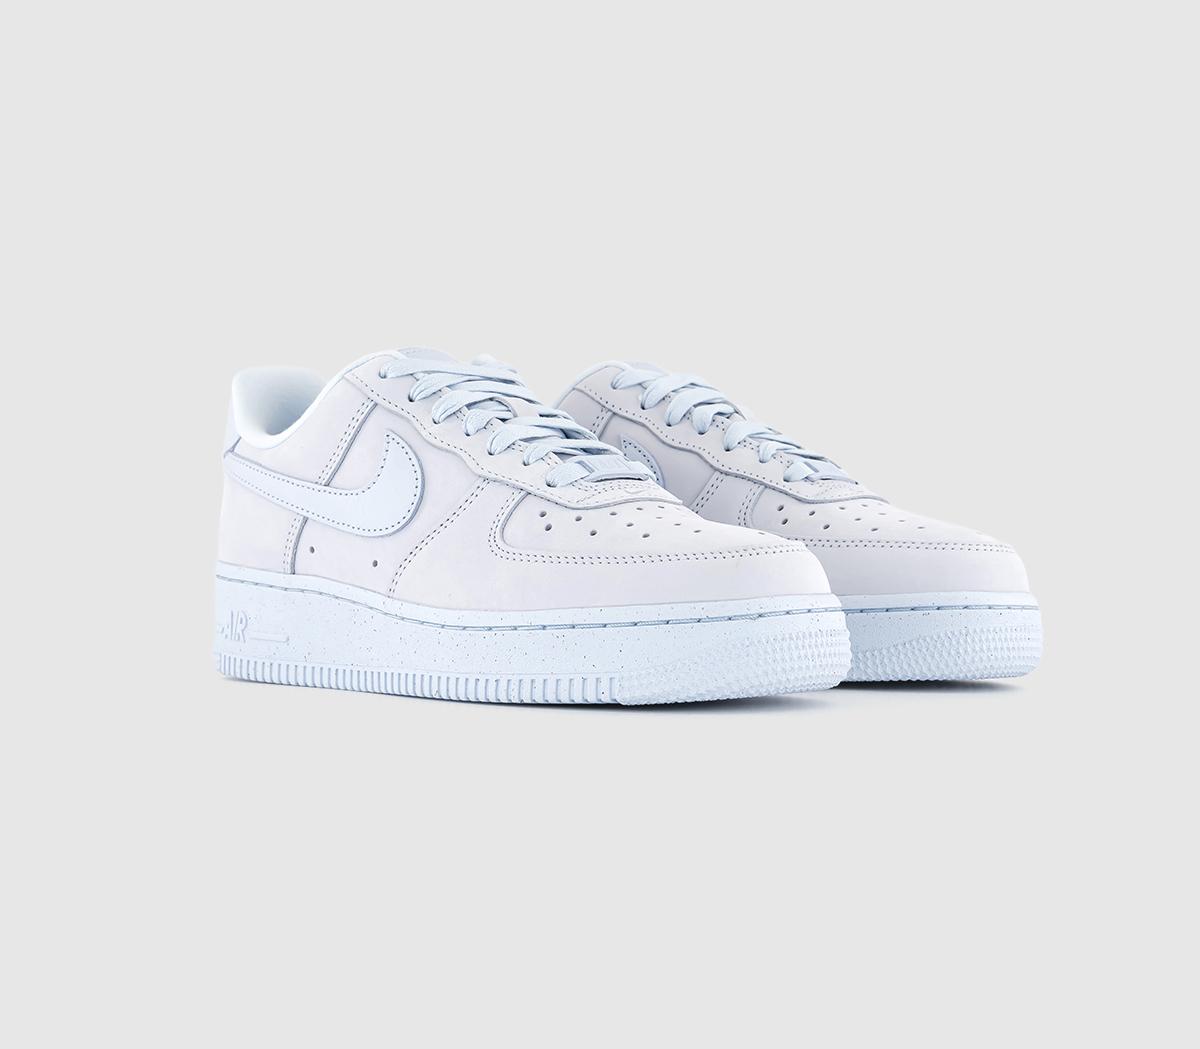 Nike Air Force 1 ’07 Prm Trainers Blue Tint, 4.5